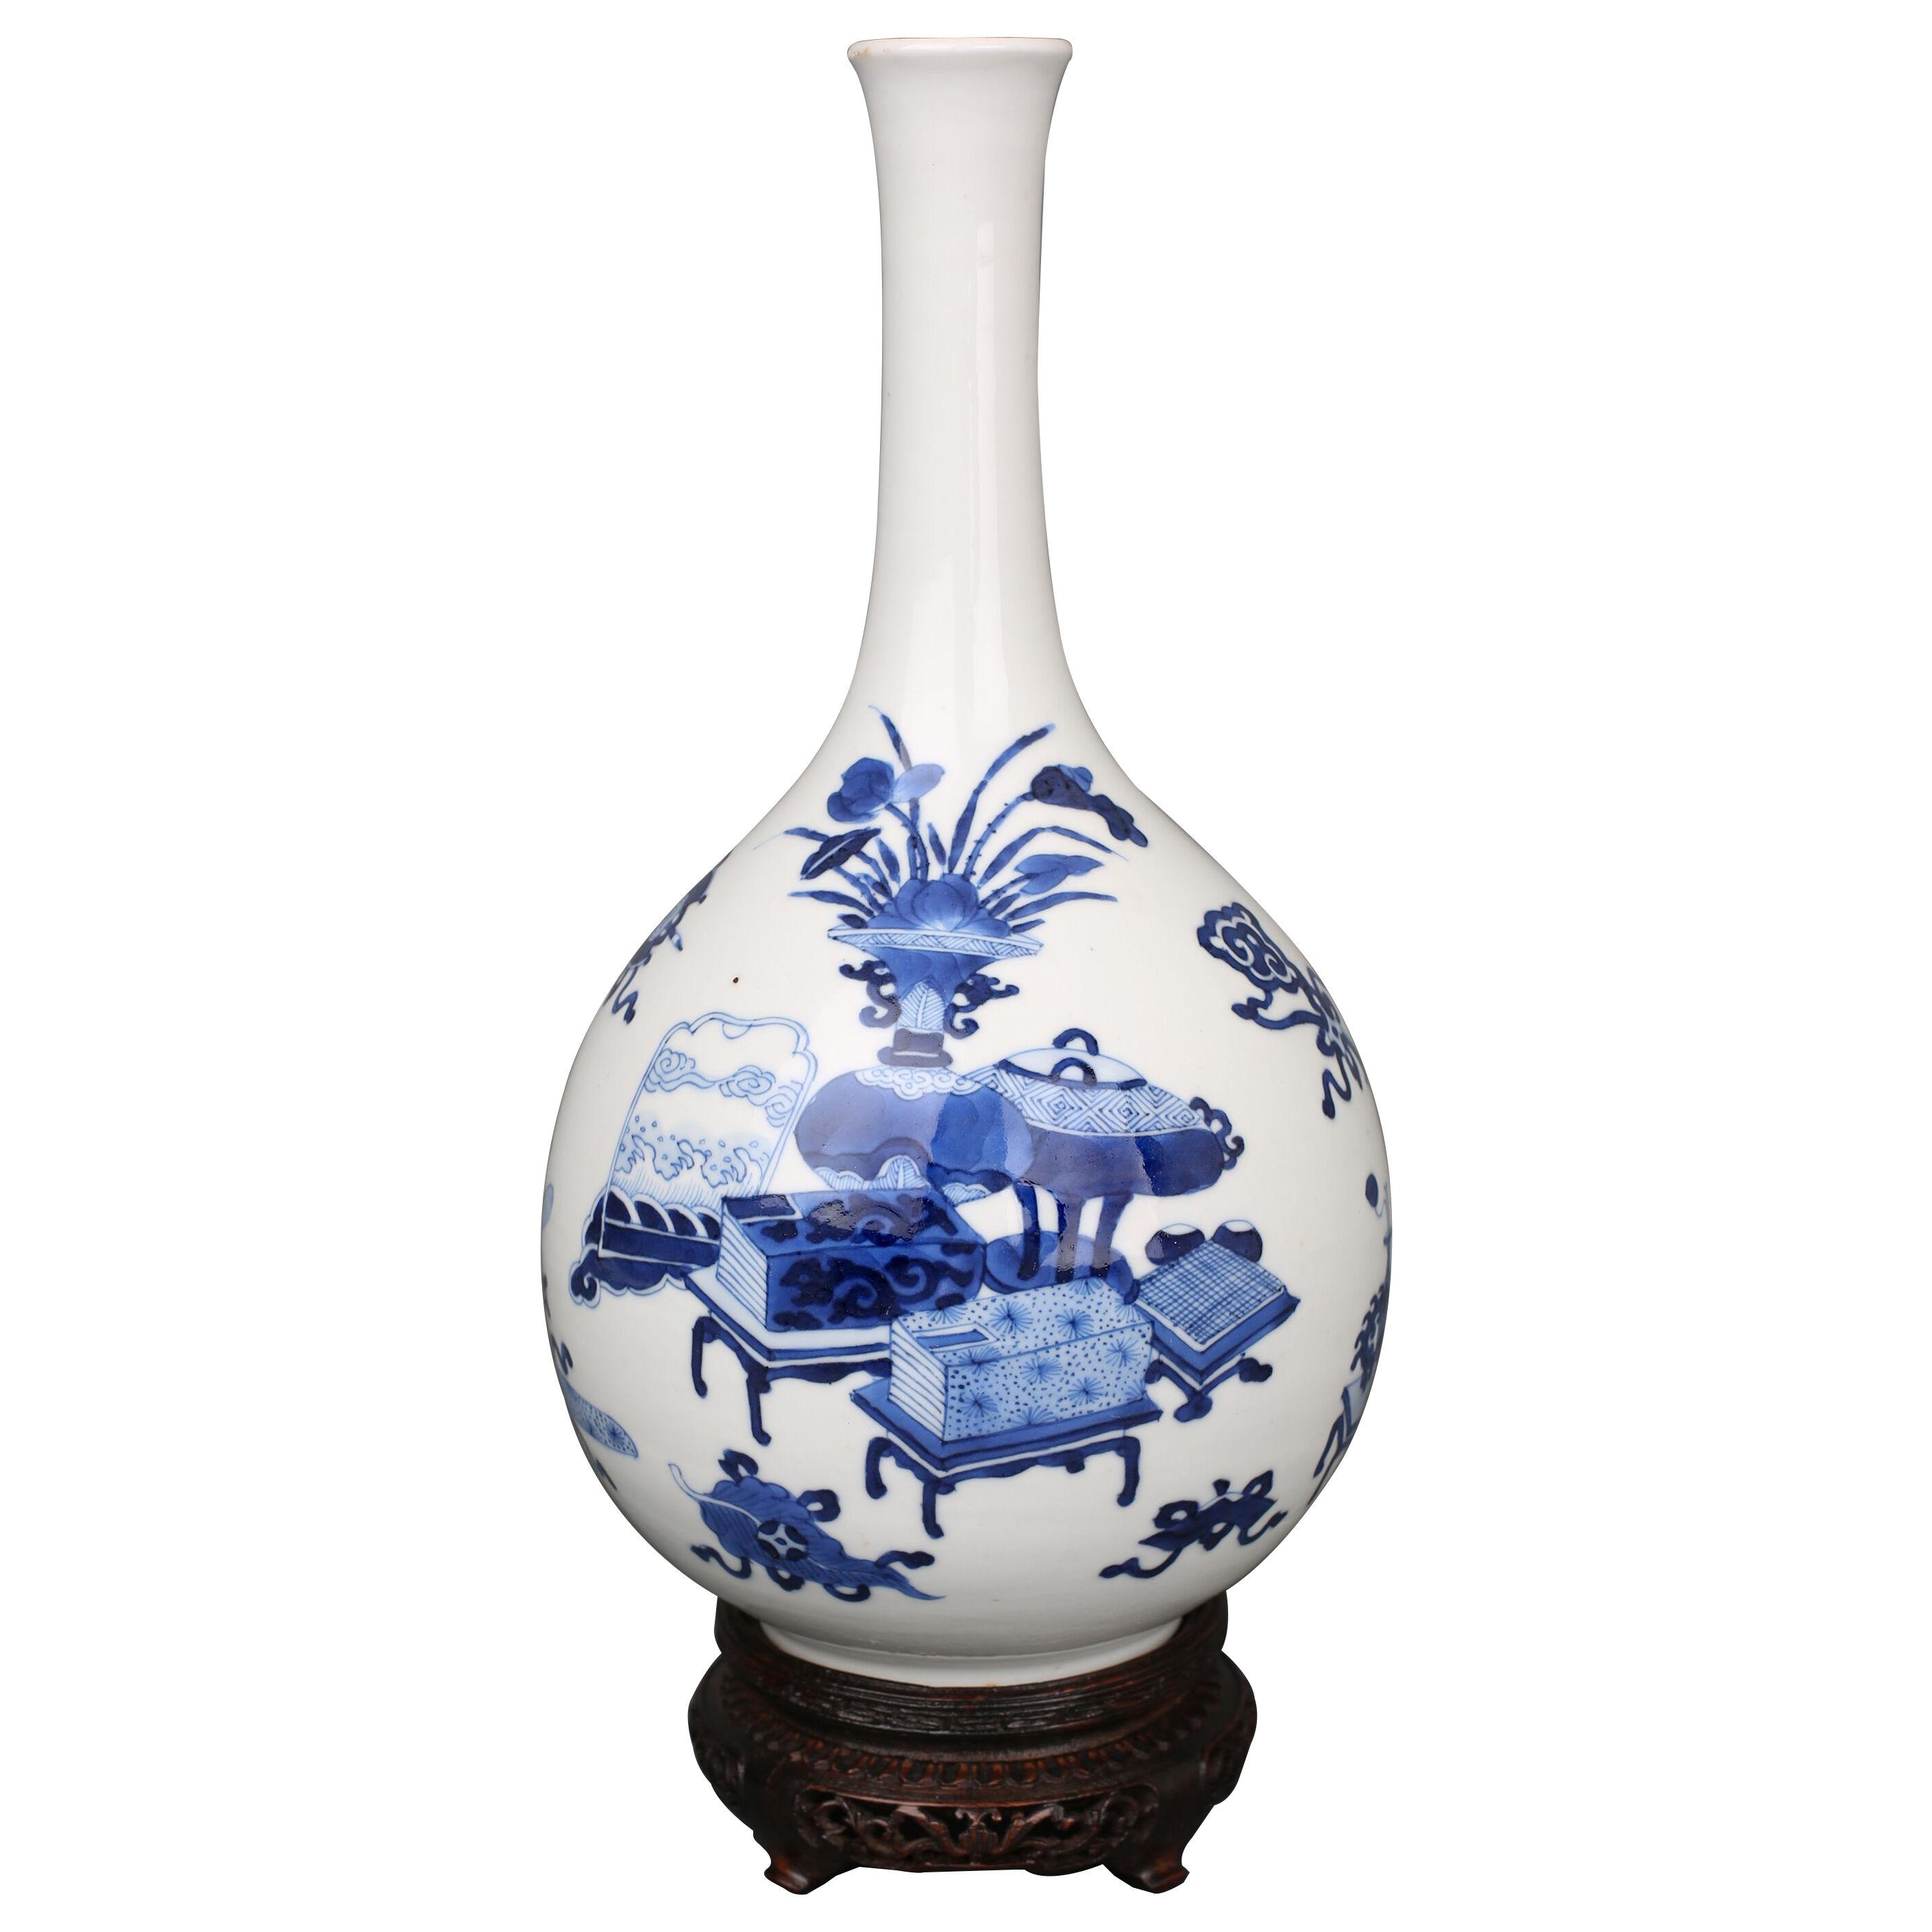 A Chinese porcelain blue and white bottle vase with rounded body